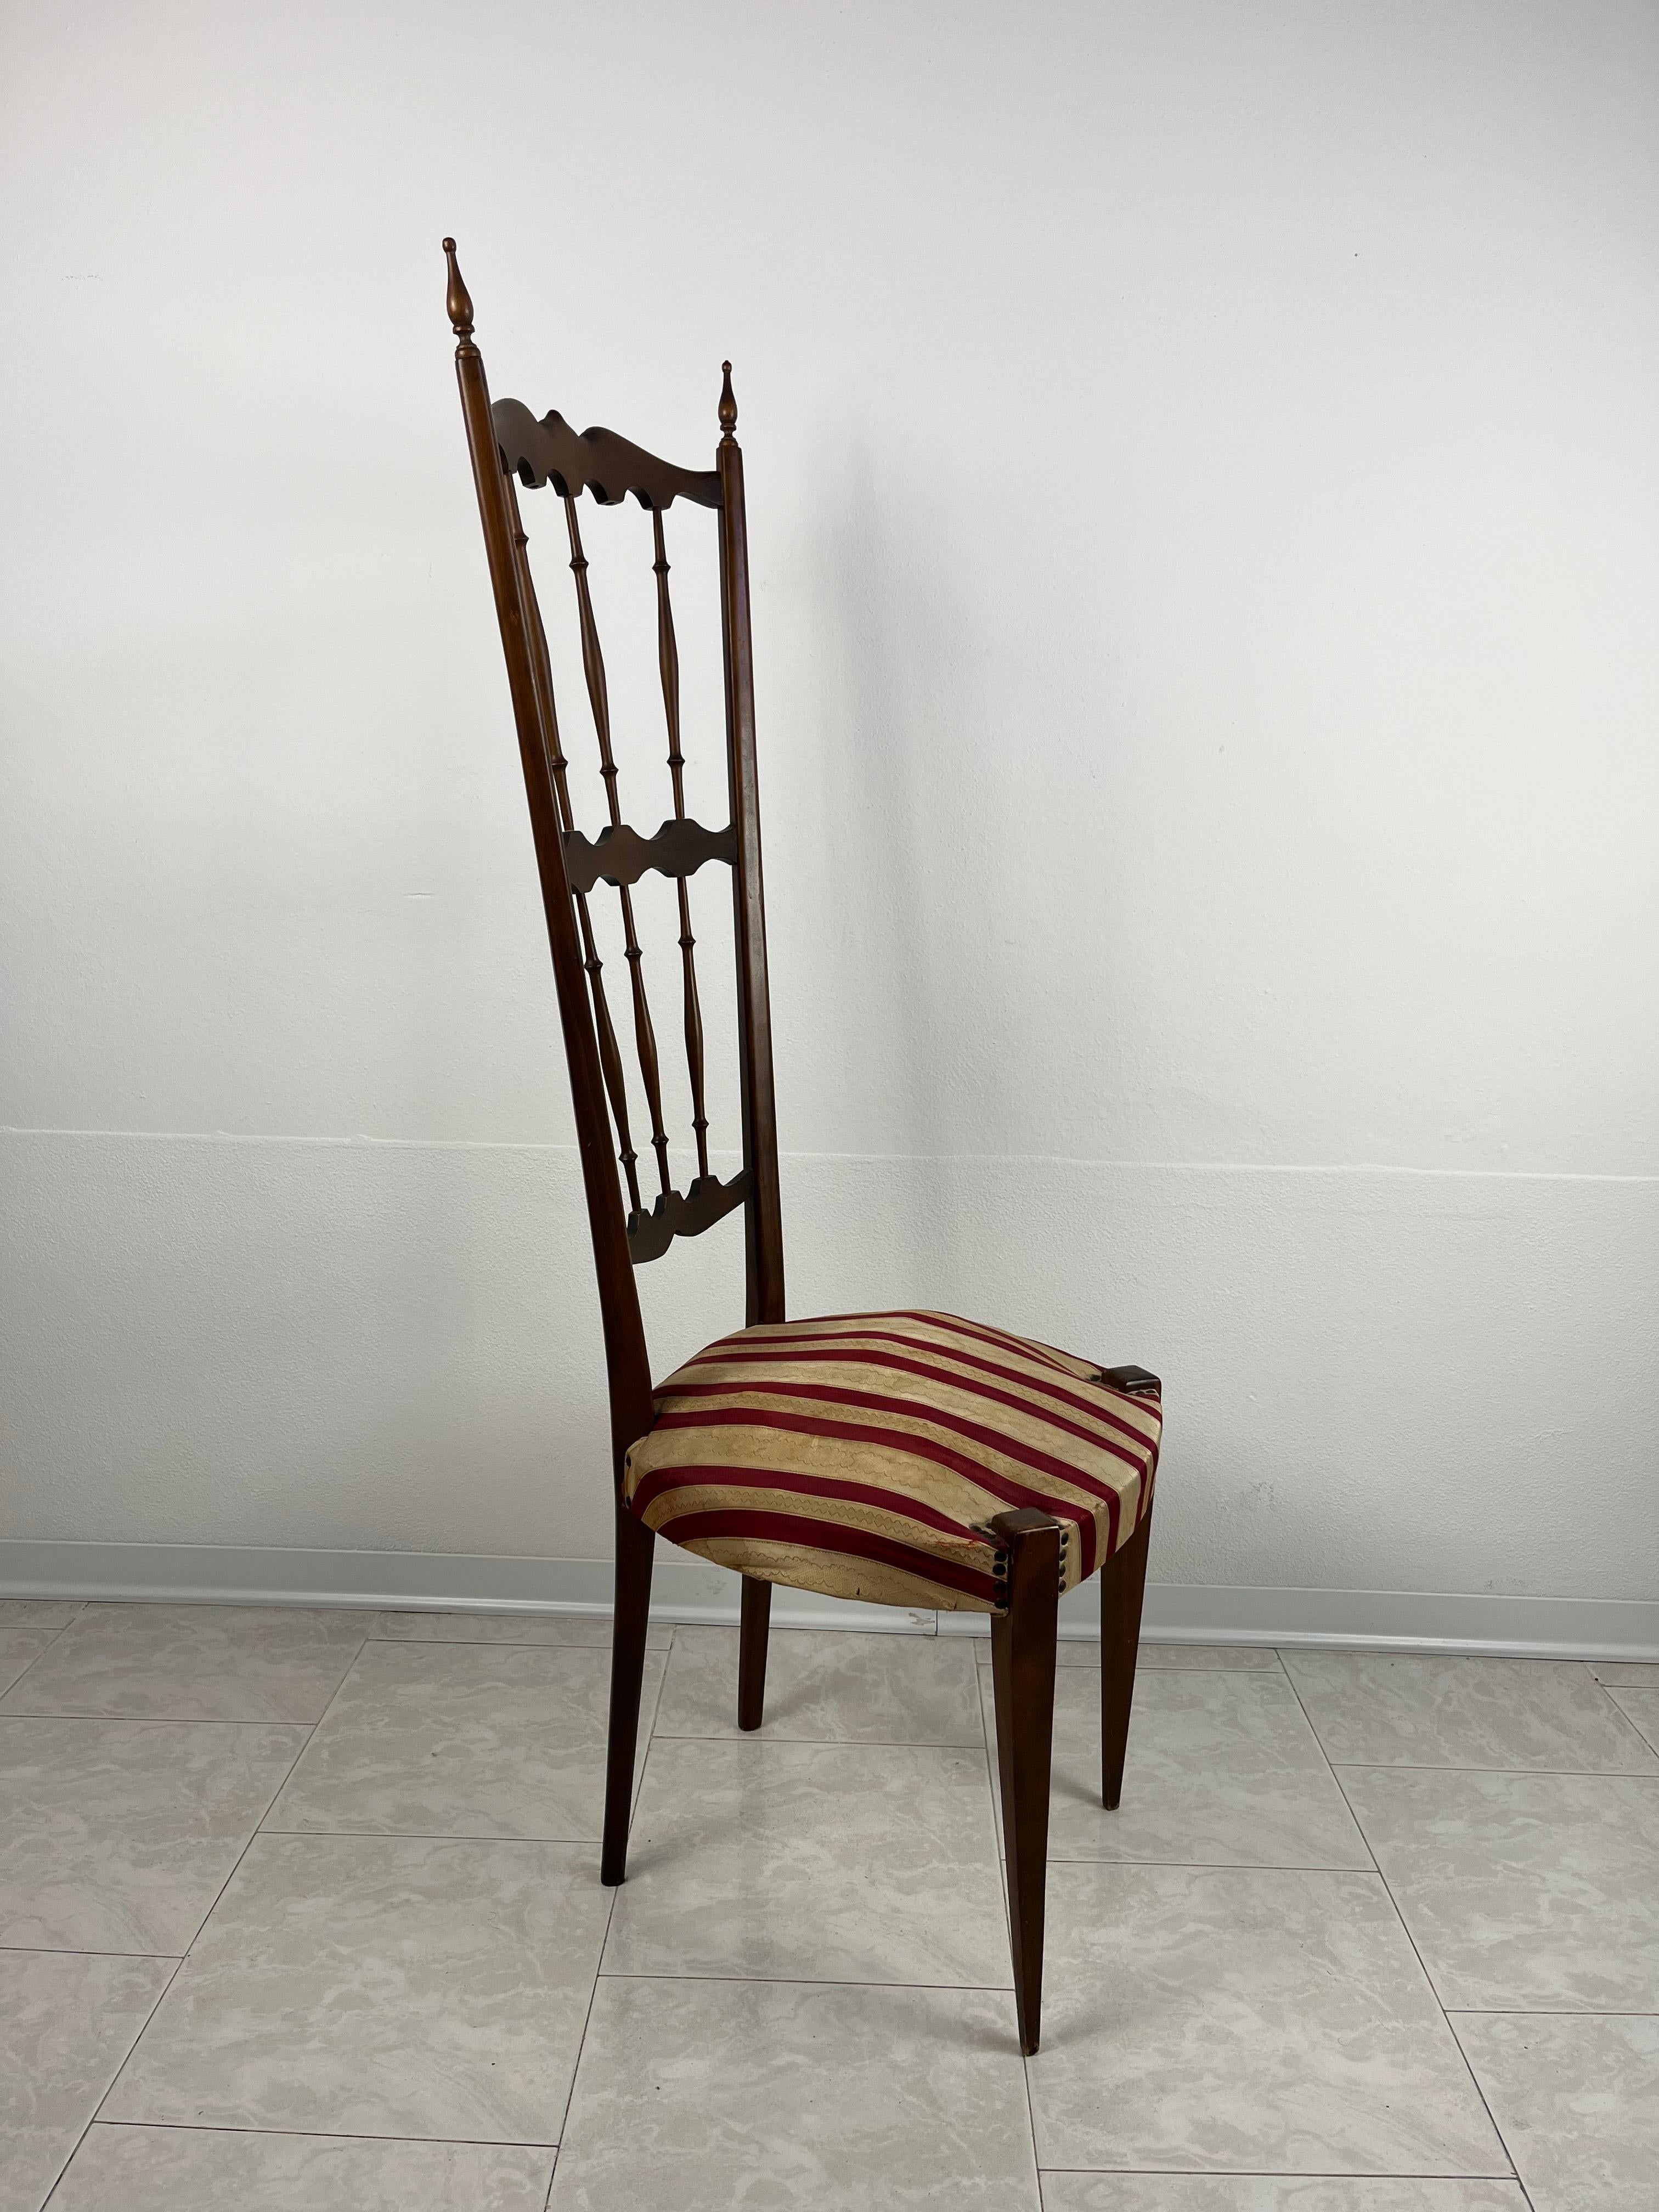 Chiavarina high back chair, Italy, 1950s.
Attributed to Gaetano Descalzi.
Good condition. One broken spring.